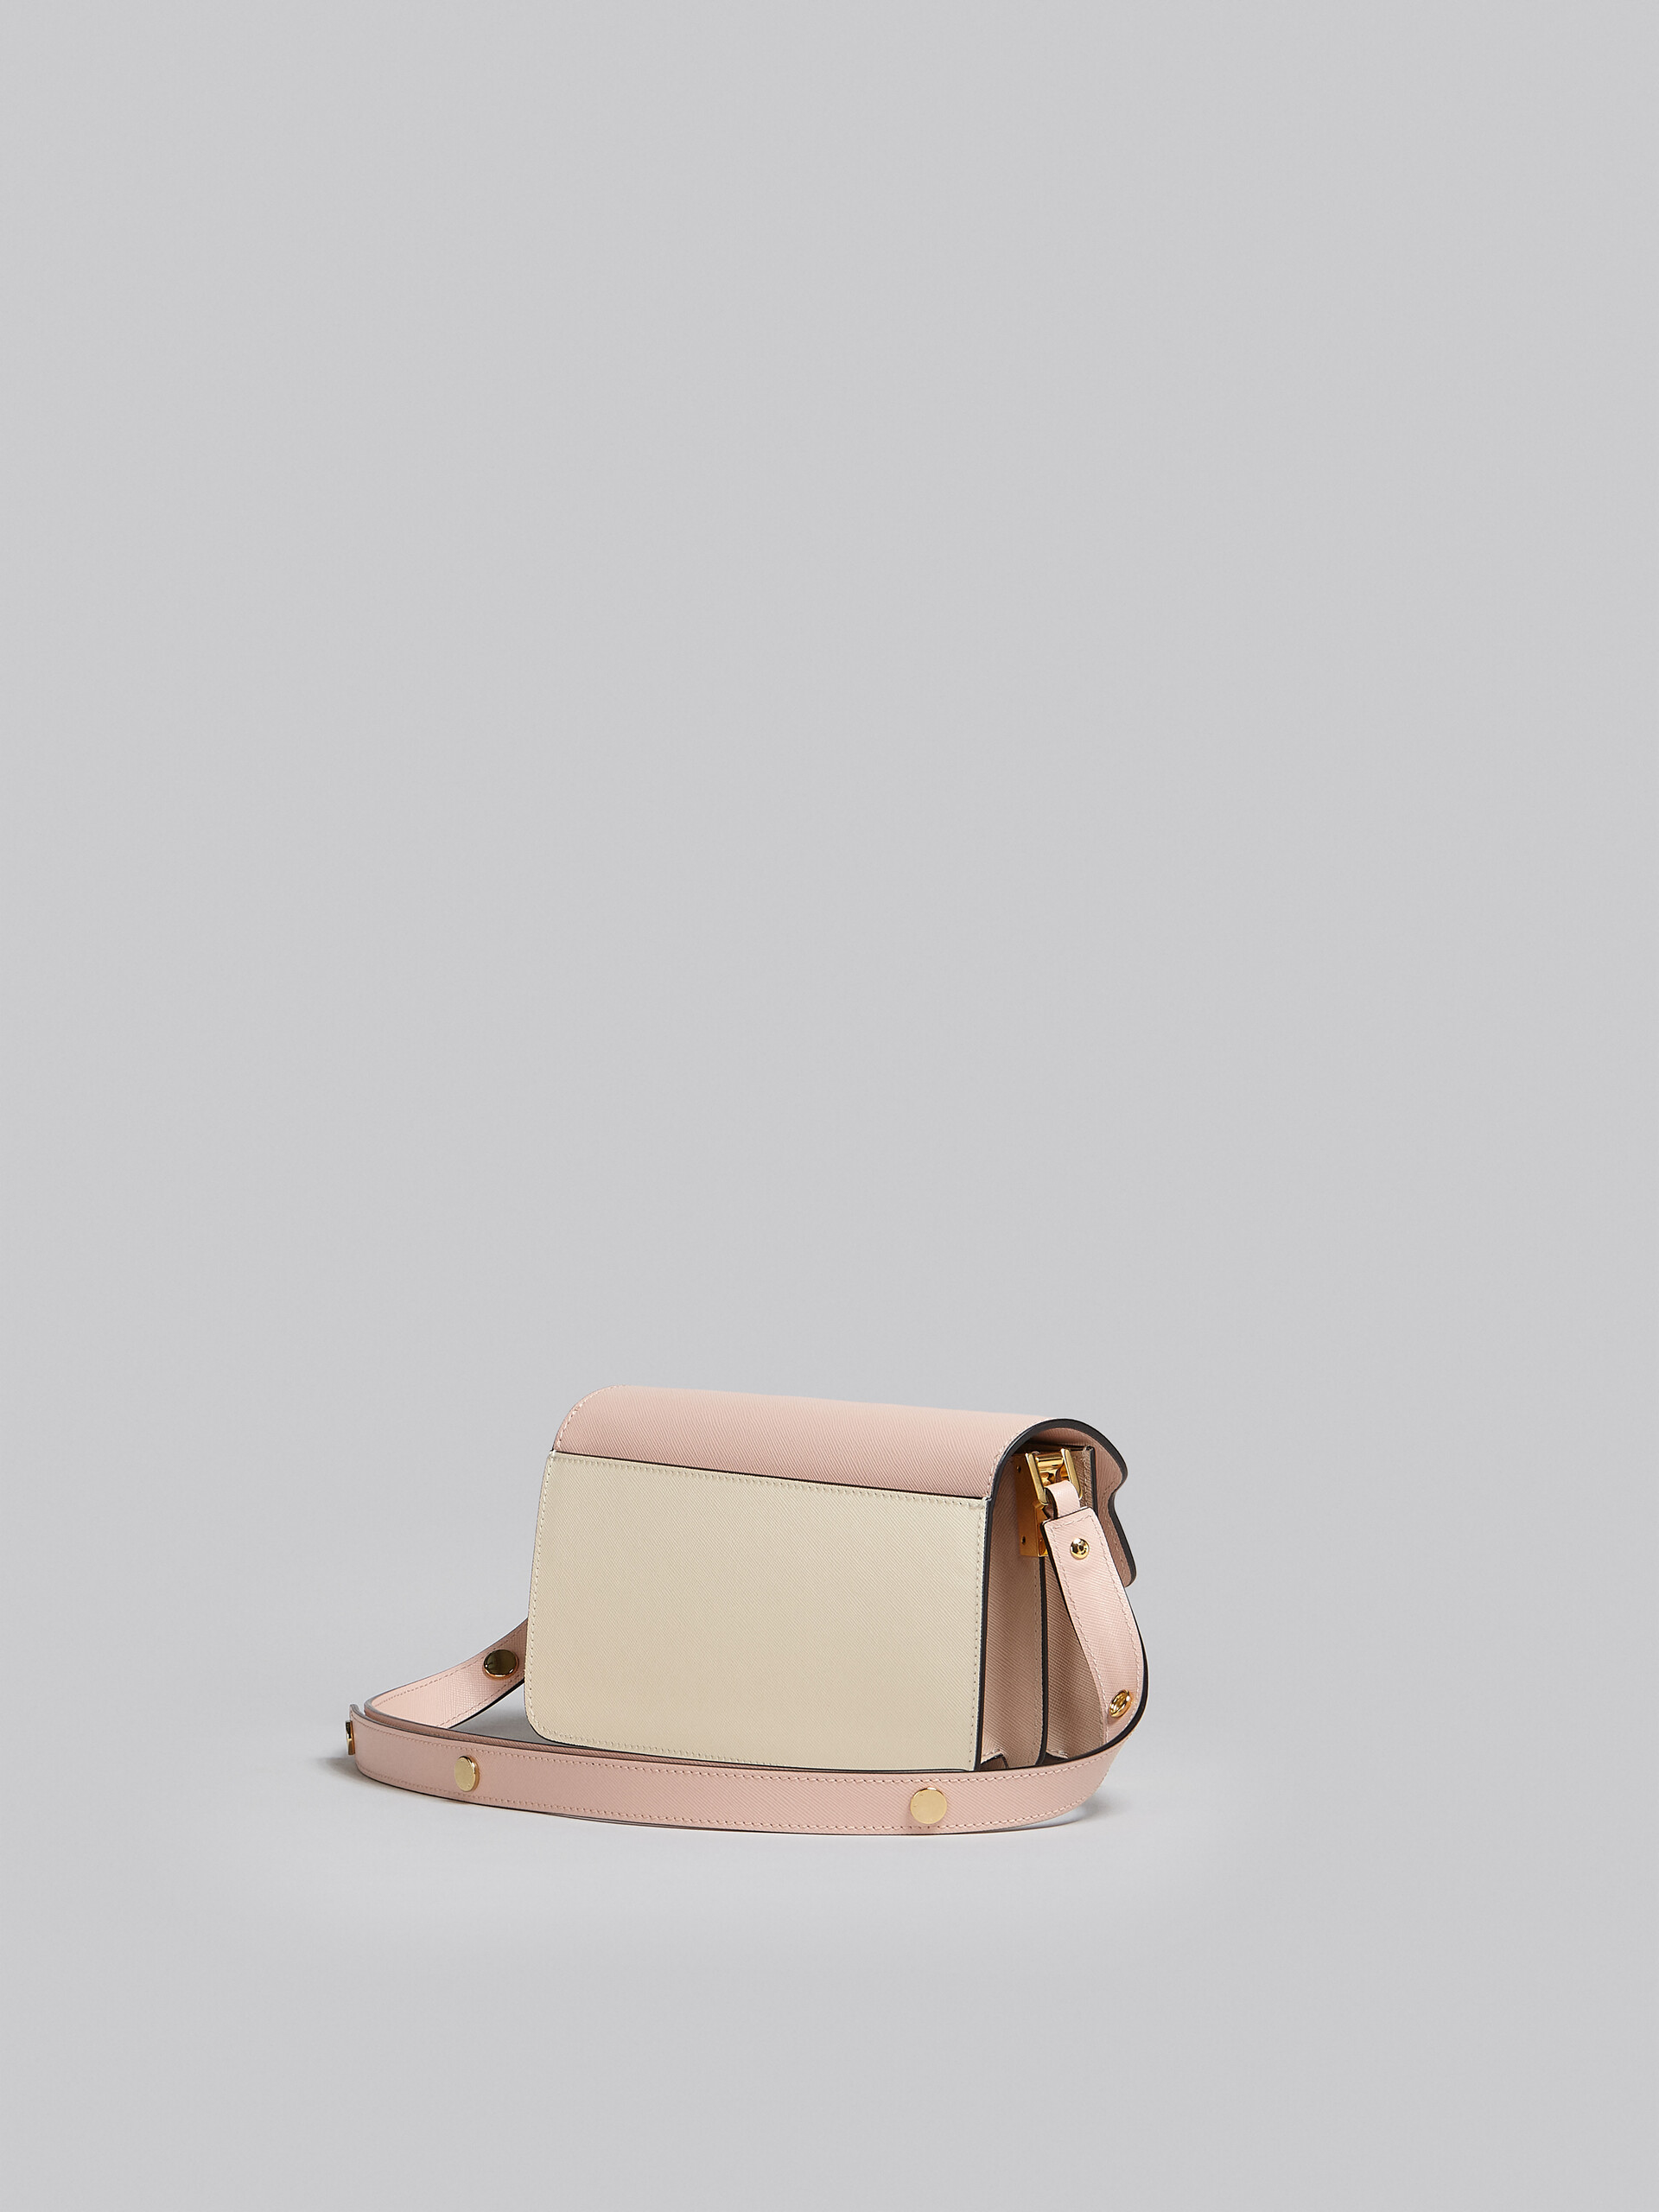 Trunk Bag E/W in pink and white saffiano leather - Shoulder Bags - Image 3